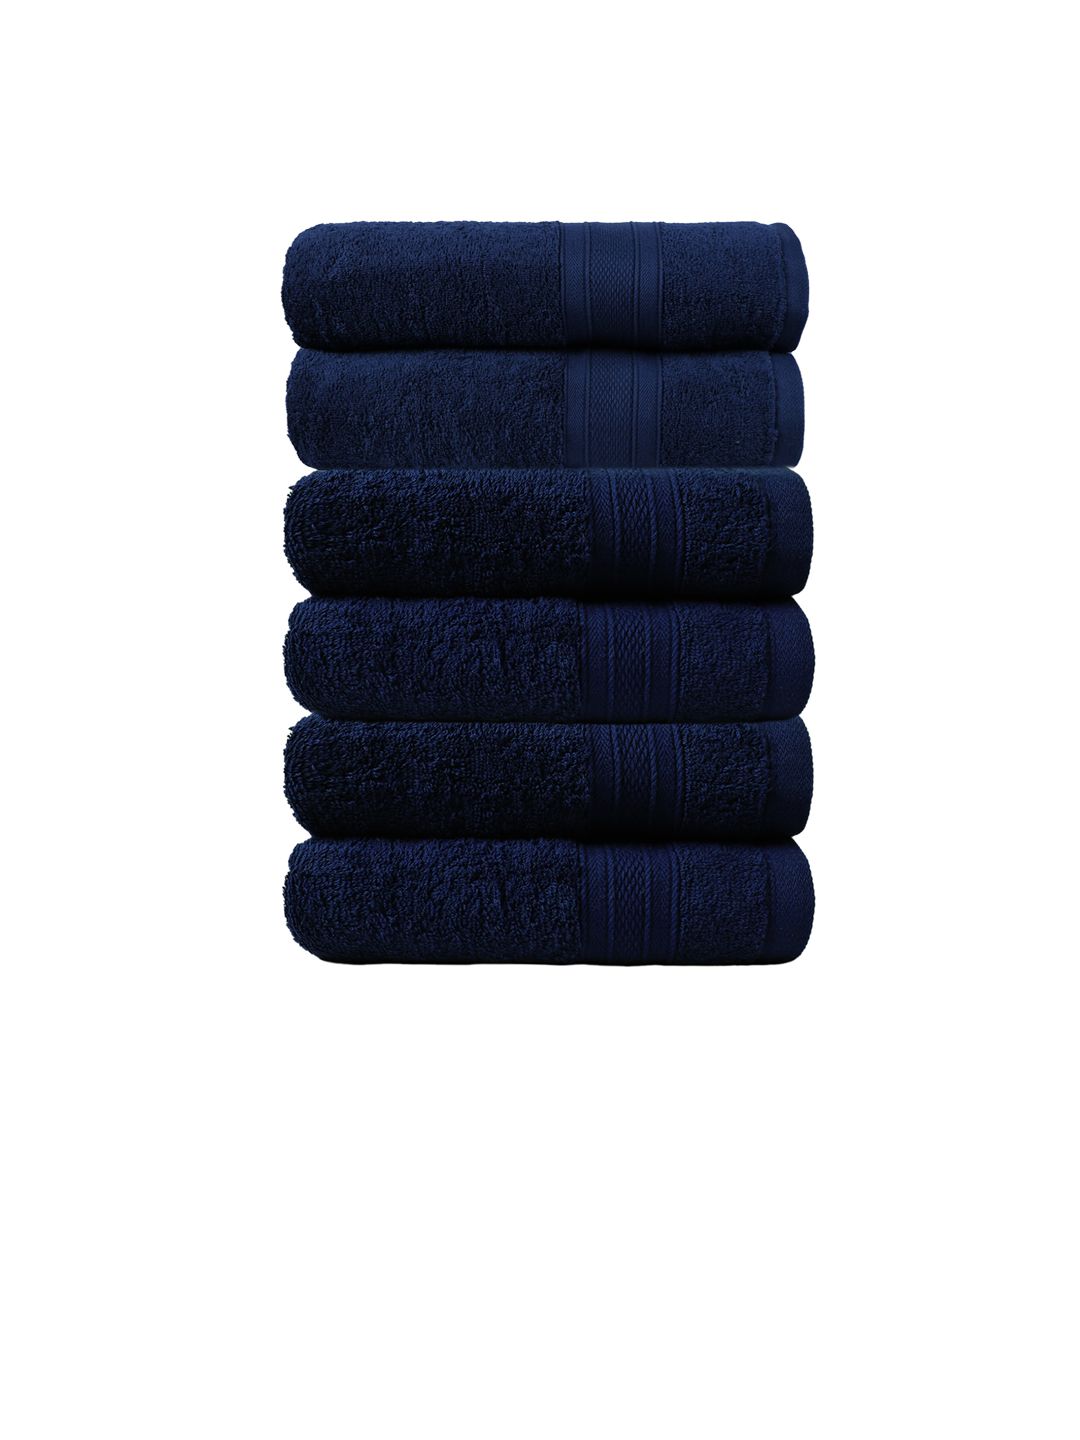 Trident Navy Blue Set of 2 Striped 500 GSM Cotton Bath Towels & Set of 4 Hand Towels Price in India